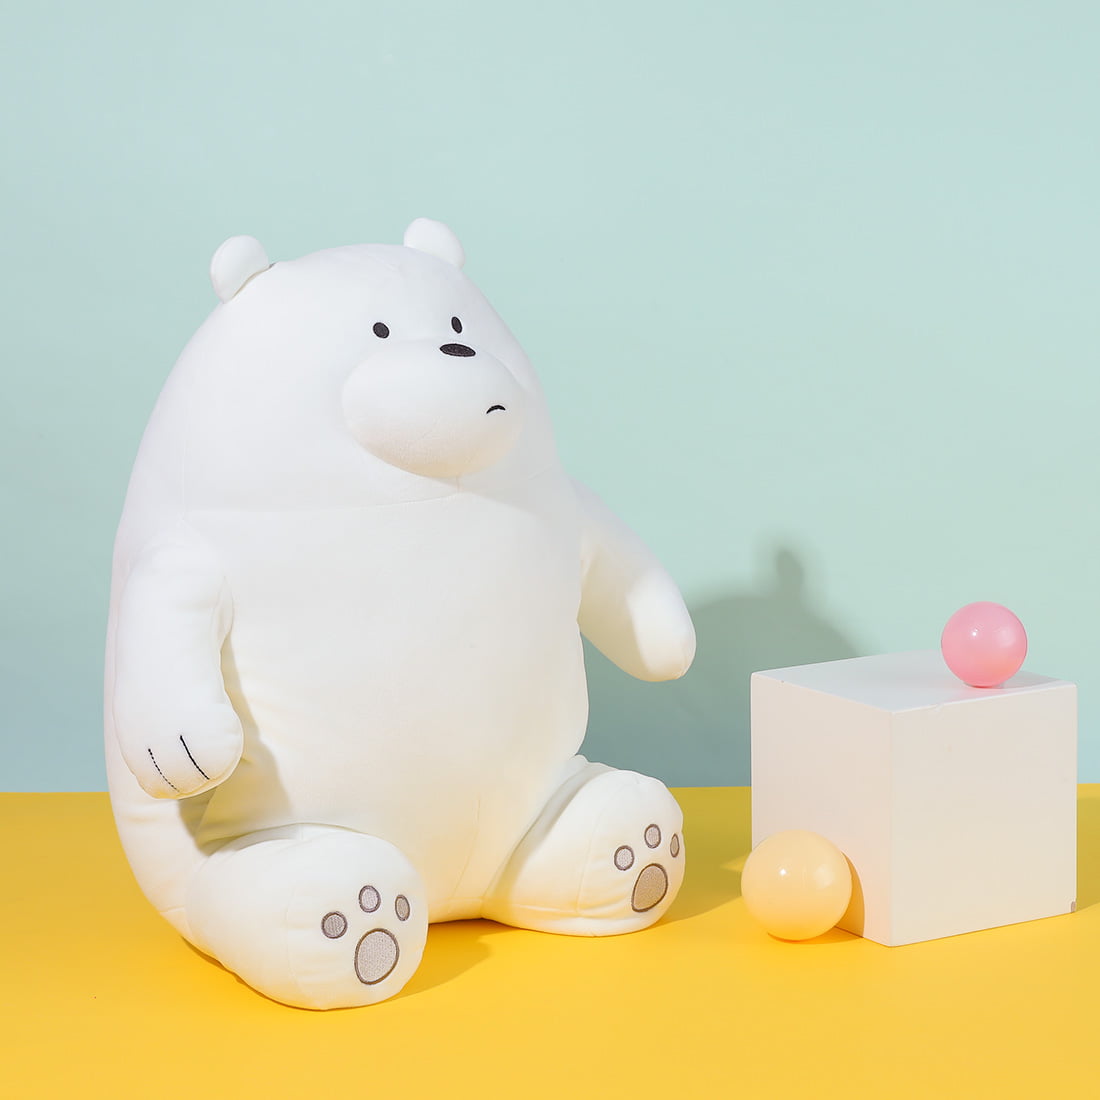 Miniso We Bare Bears Summer Vacation Series 11.8 Sitting Plush Toy